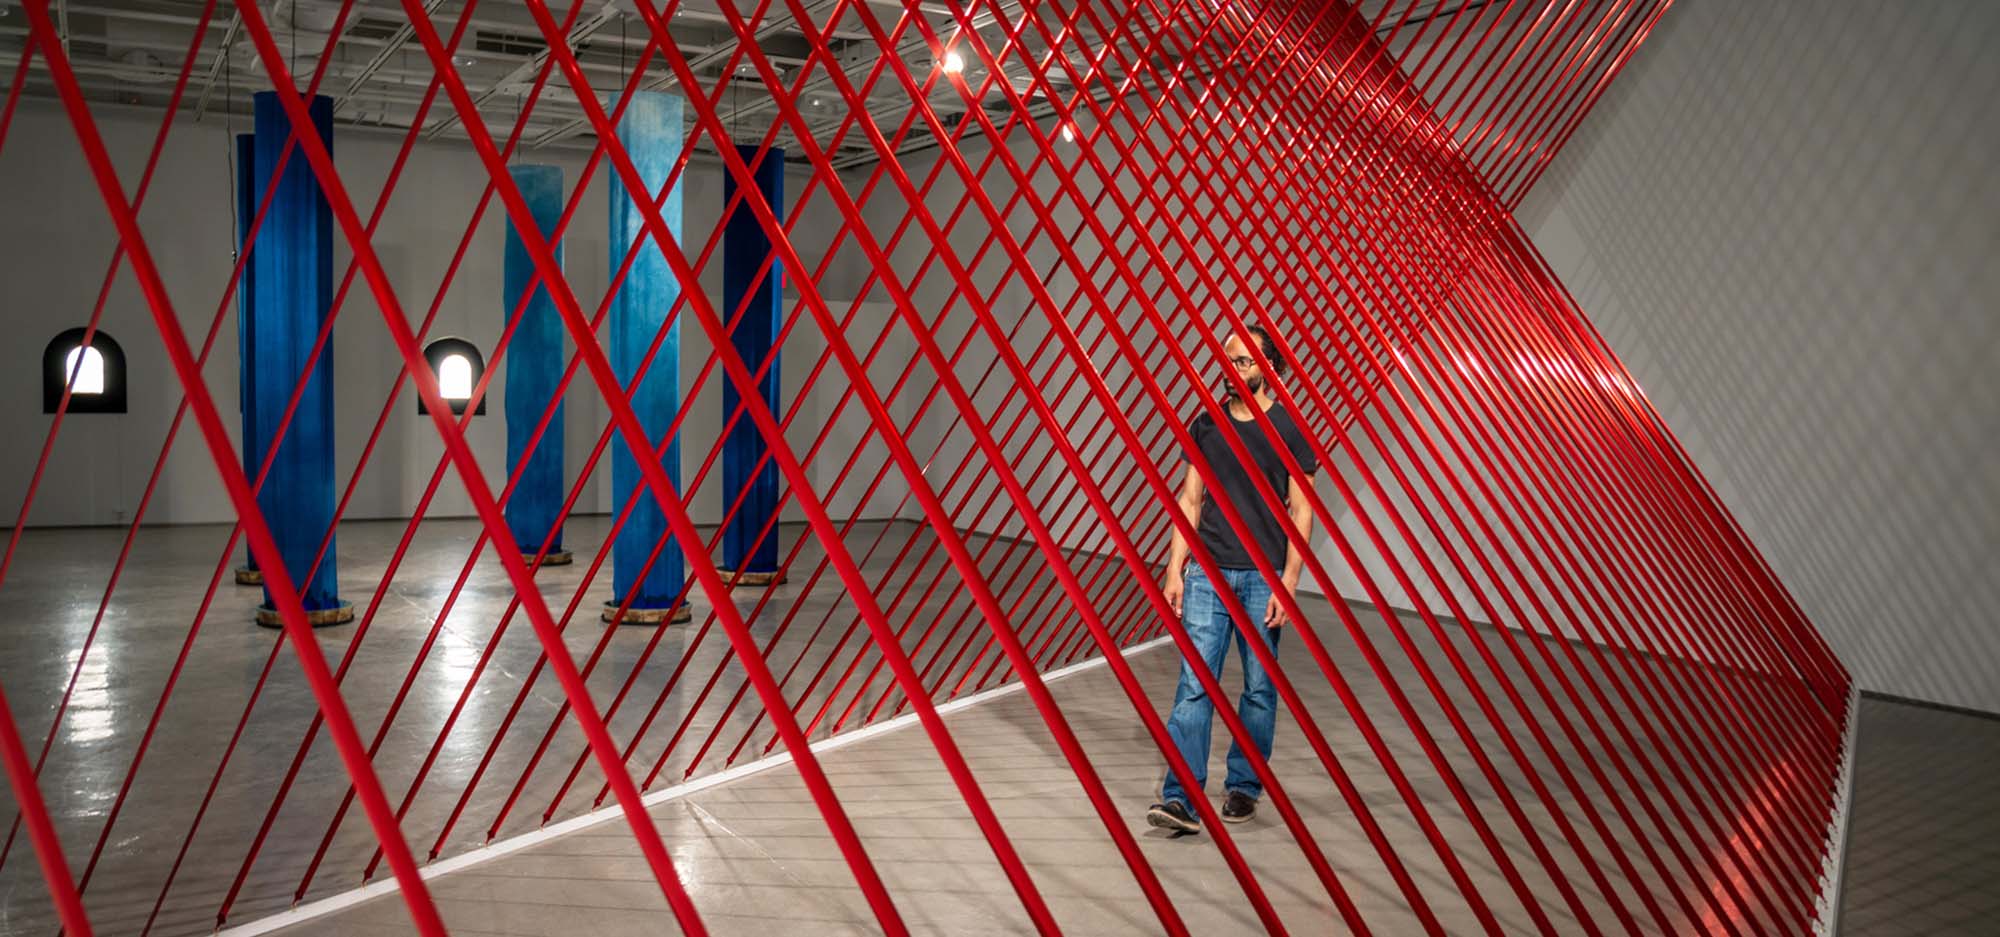 Man walking through a tunnel made with red thin beams inside a large open space.